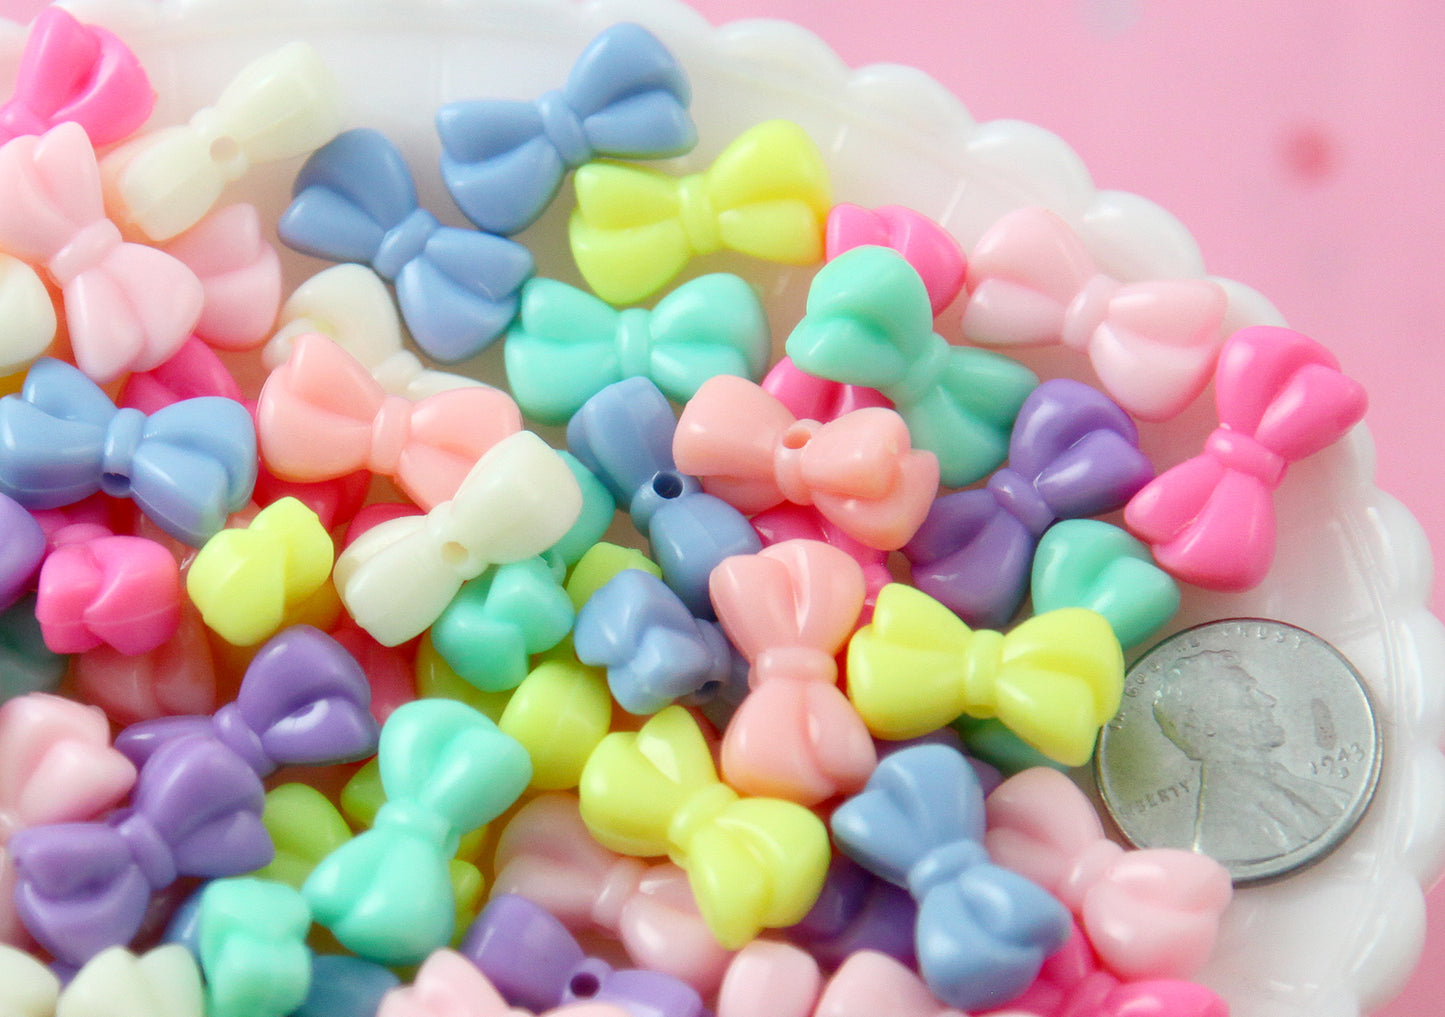 Pastel Beads - 18mm Beautiful Bright Small Cute Bow or Ribbon Shape Plastic Acrylic or Resin Beads - 80 pc set